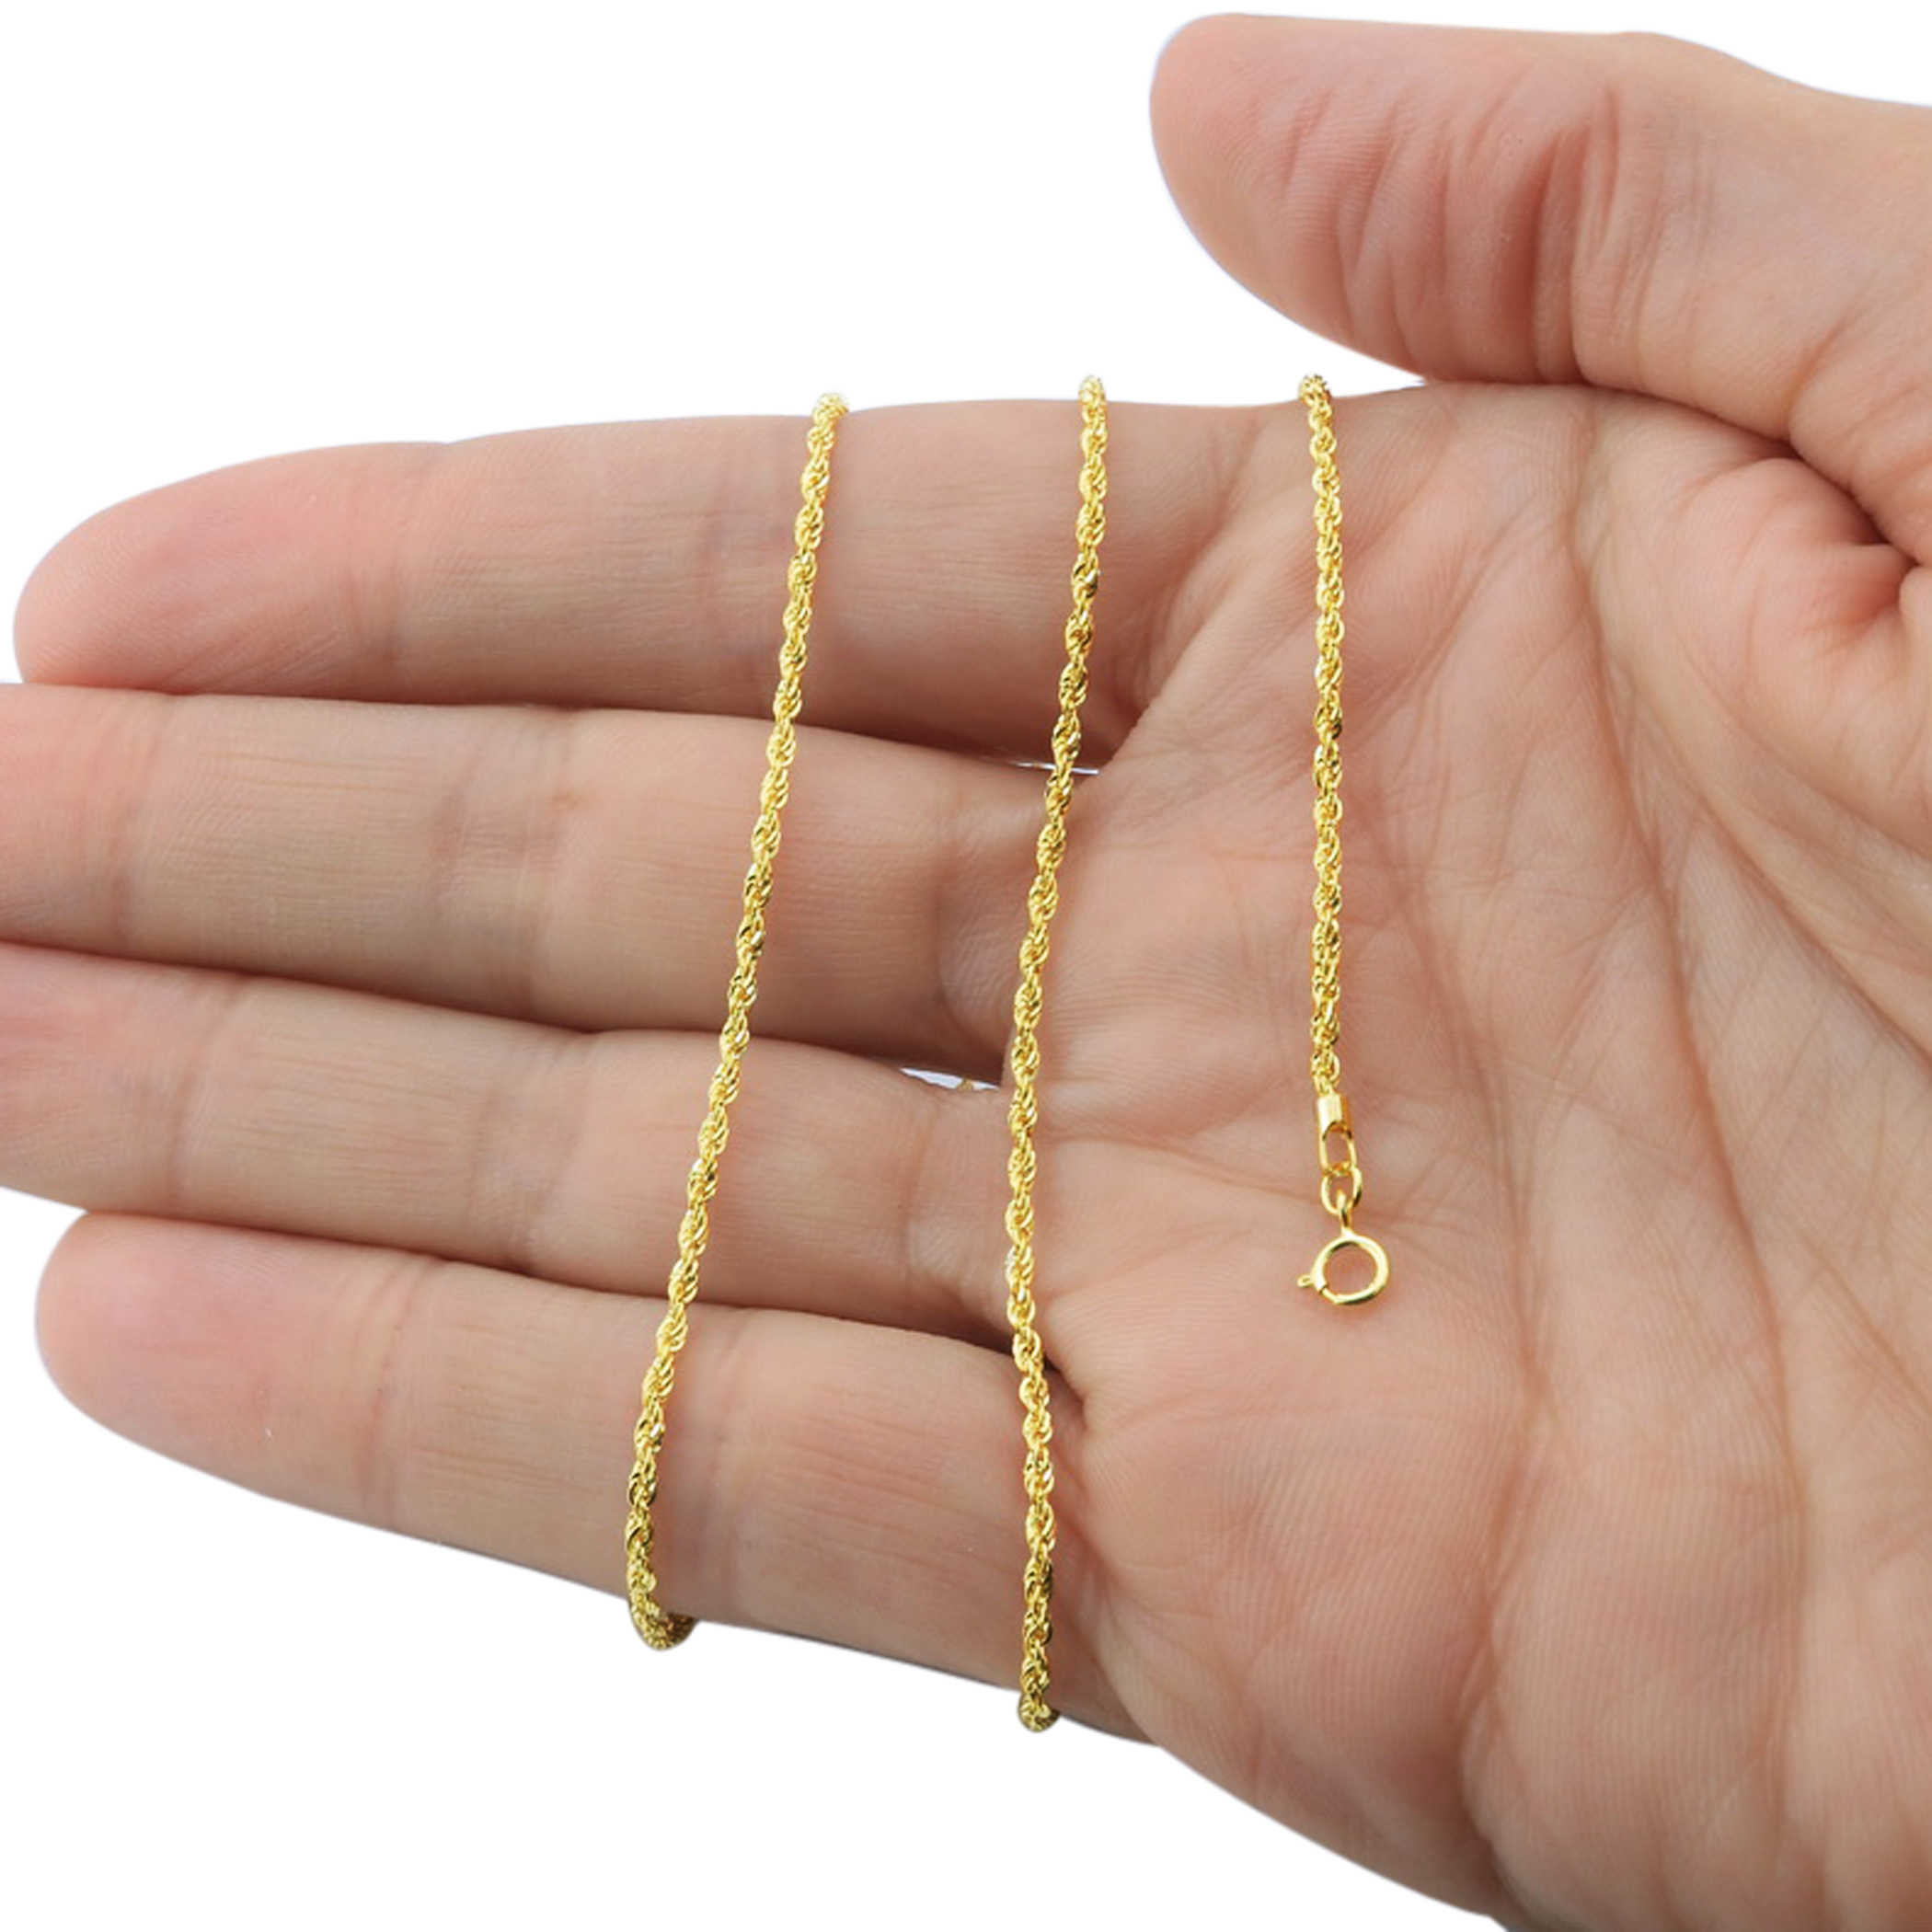 Nuragold 14k Yellow Gold 2.5mm Solid Rope Chain Diamond Cut Pendant Necklac 